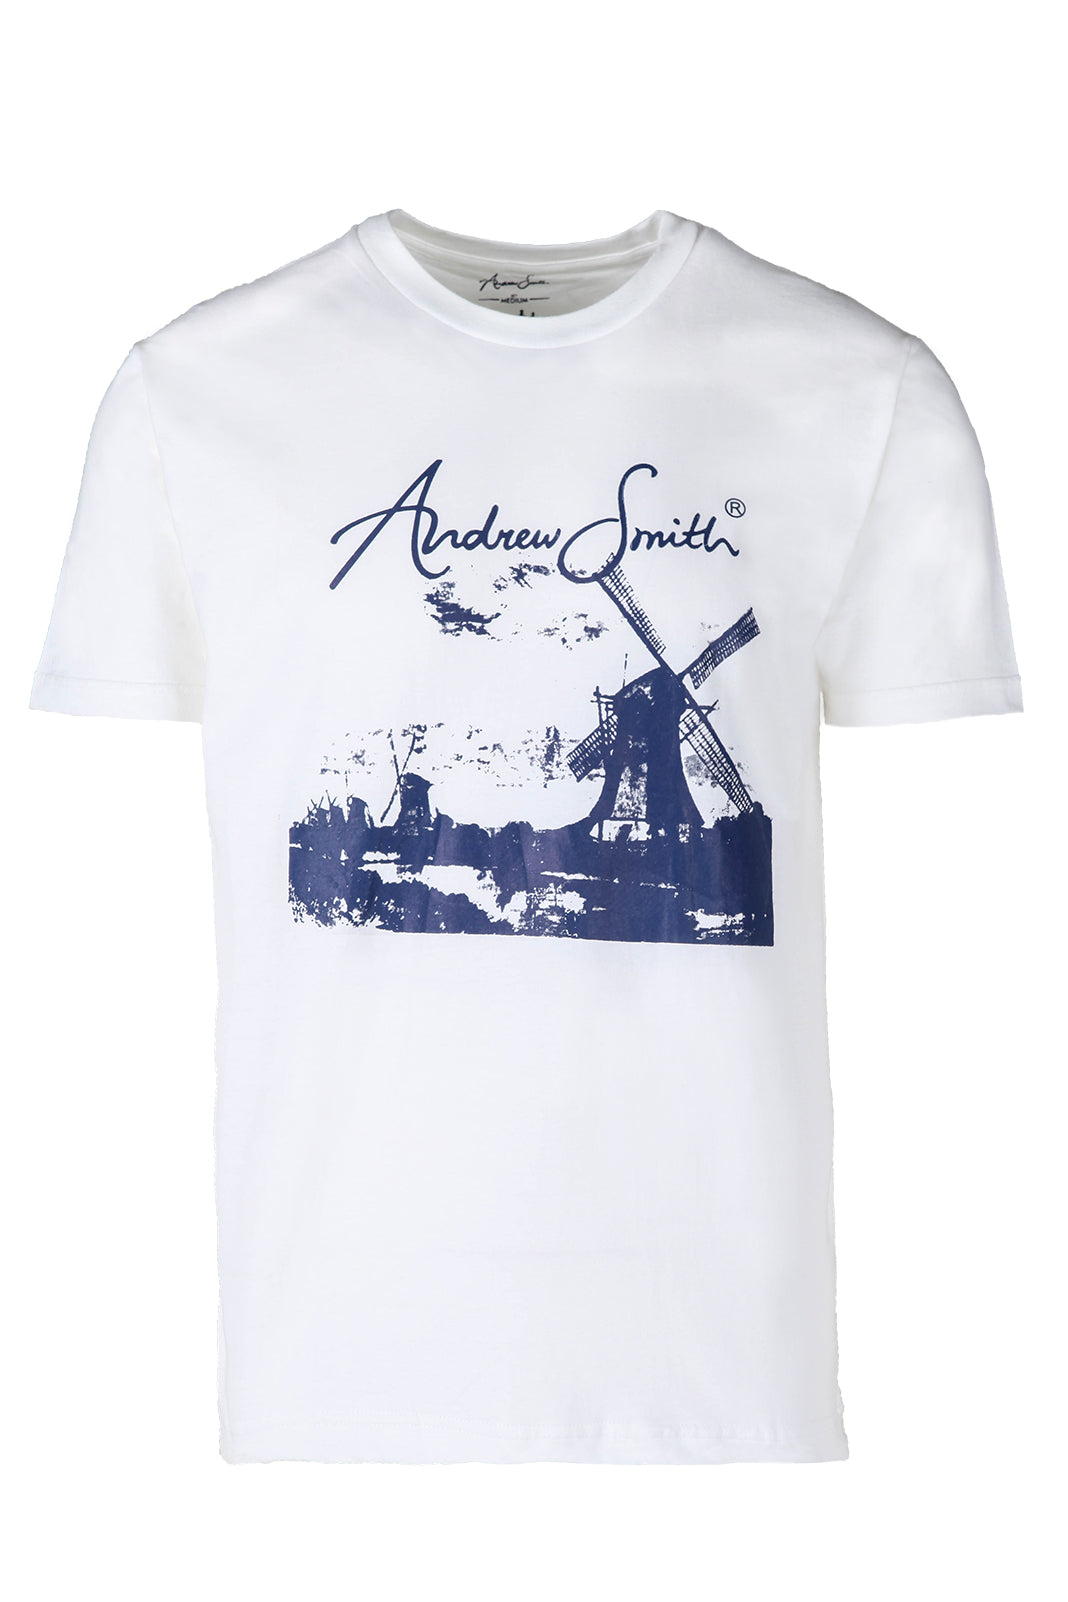 Andrew Smith T-Shirt Slim Fit Pria A0105X08A